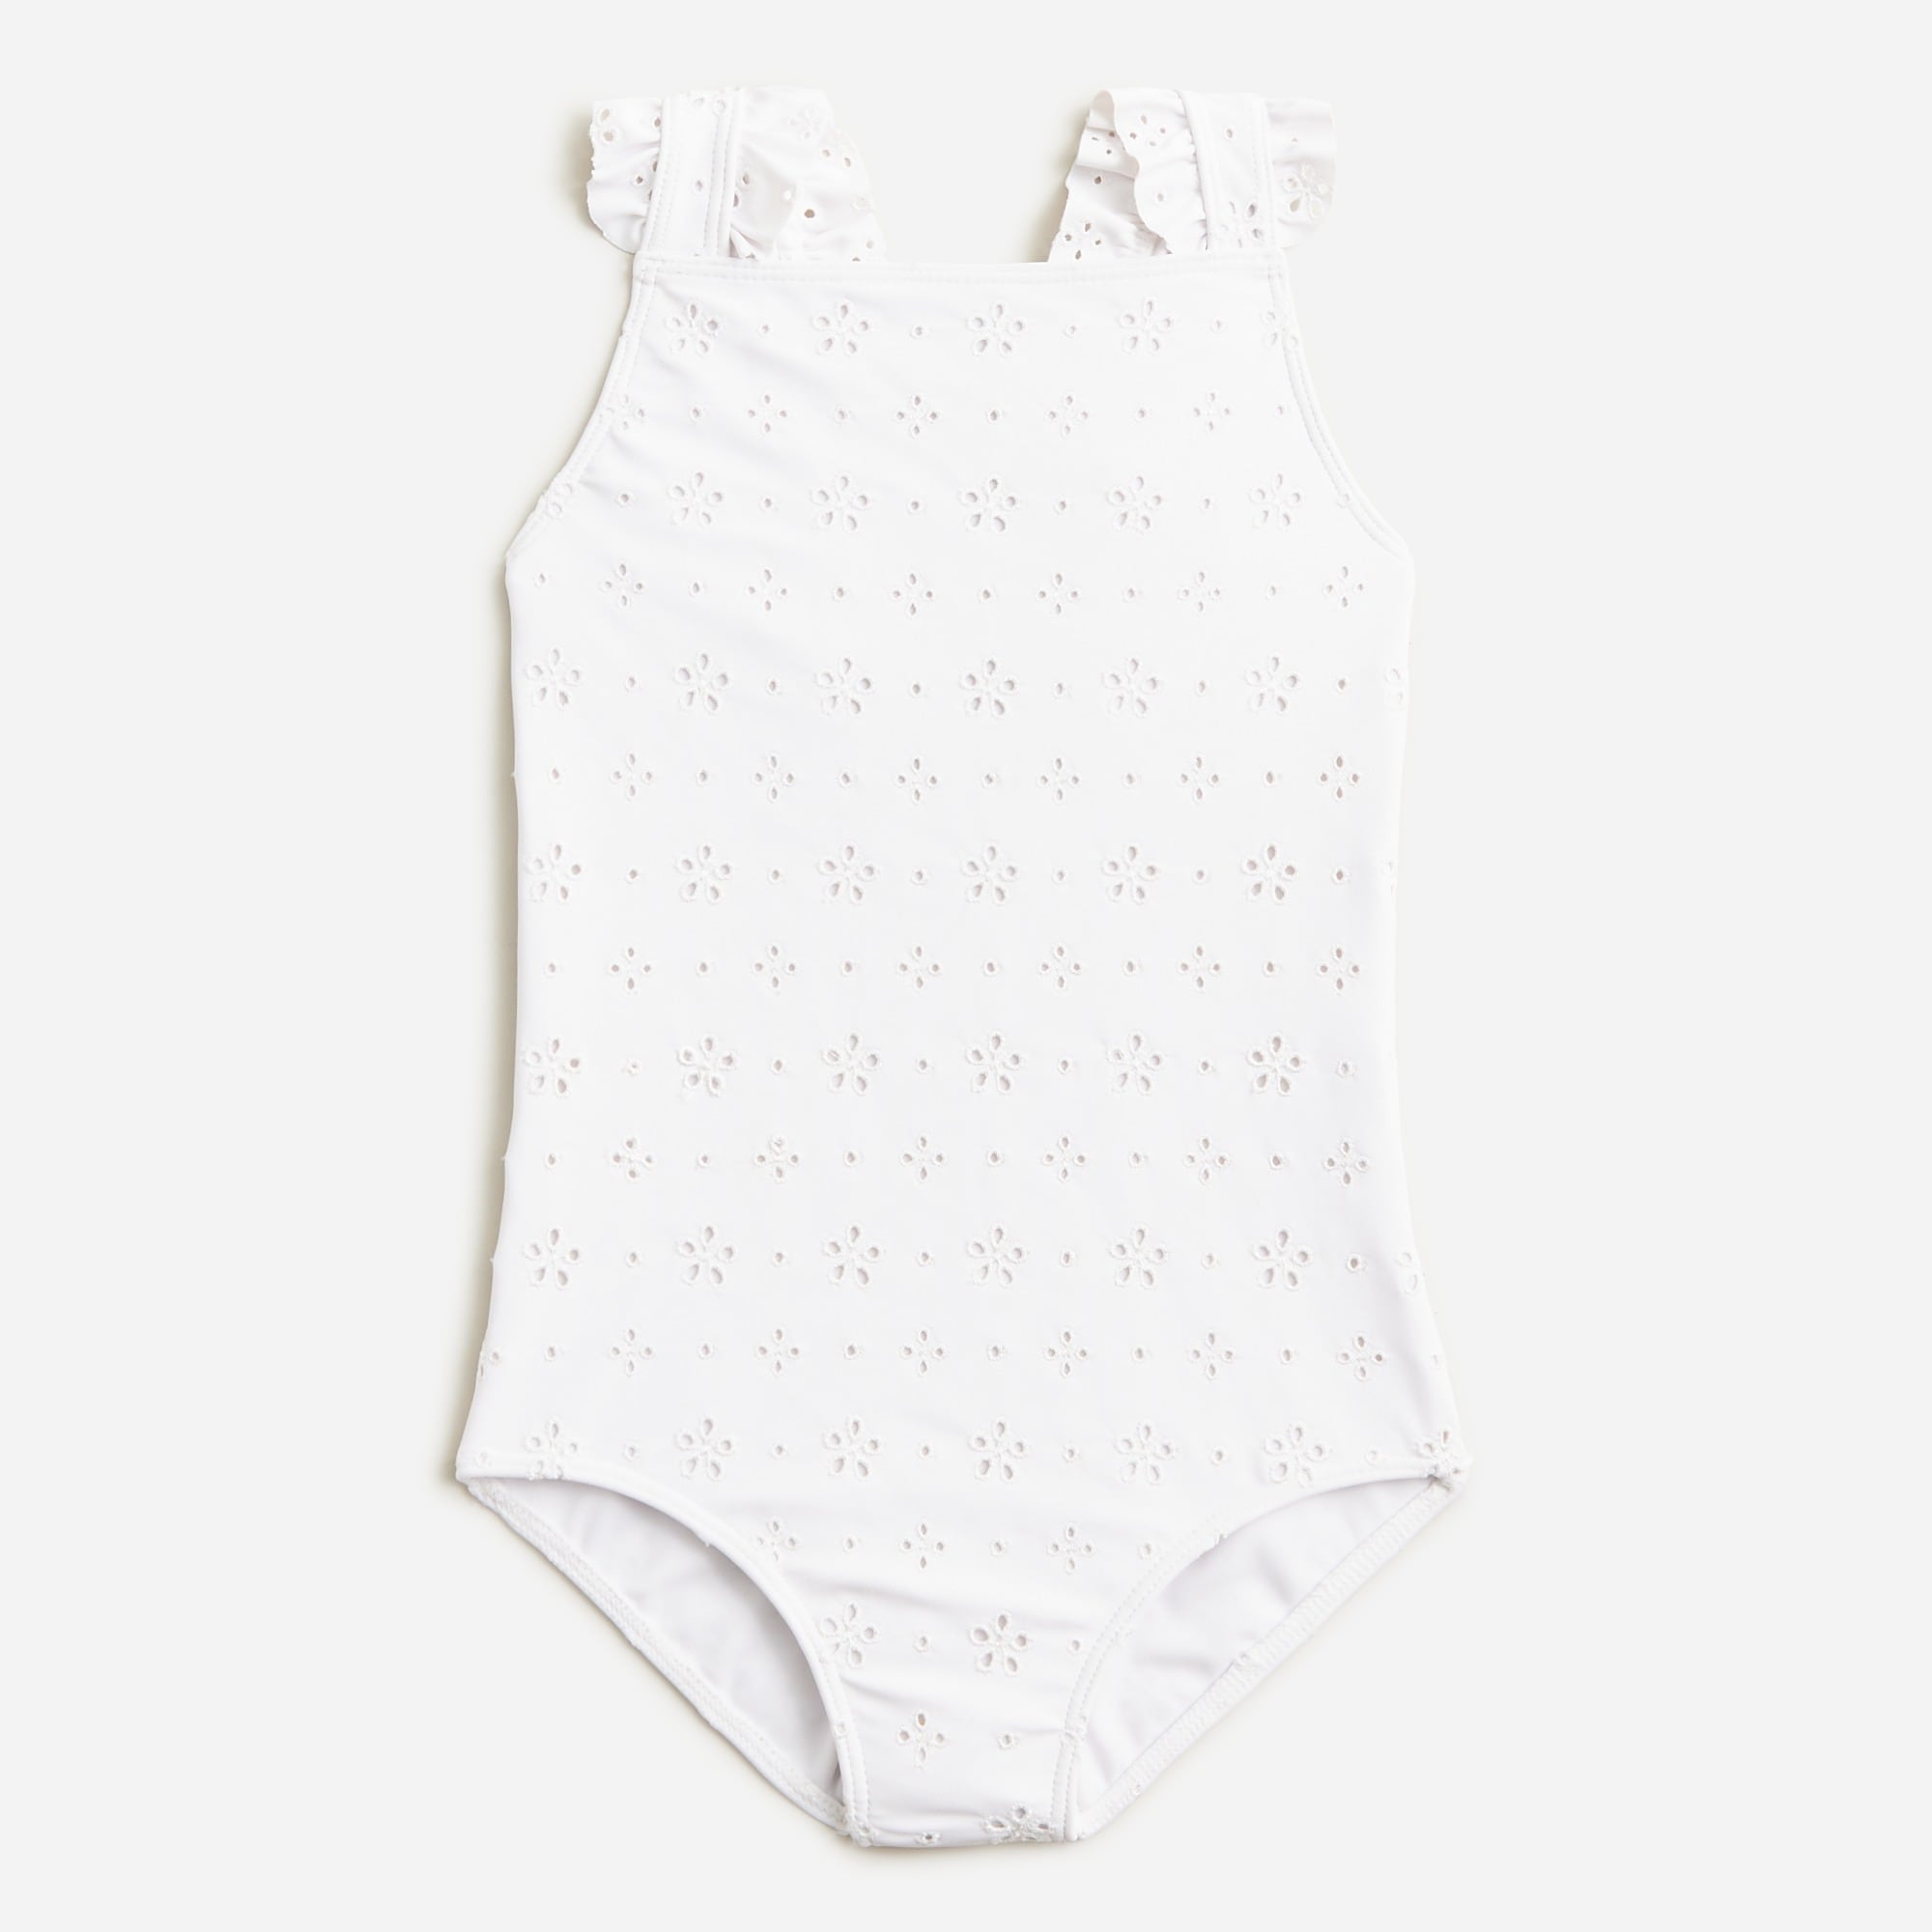  minnow&trade; X Crewcuts girls' eyelet one-piece swimsuit with UPF 50+